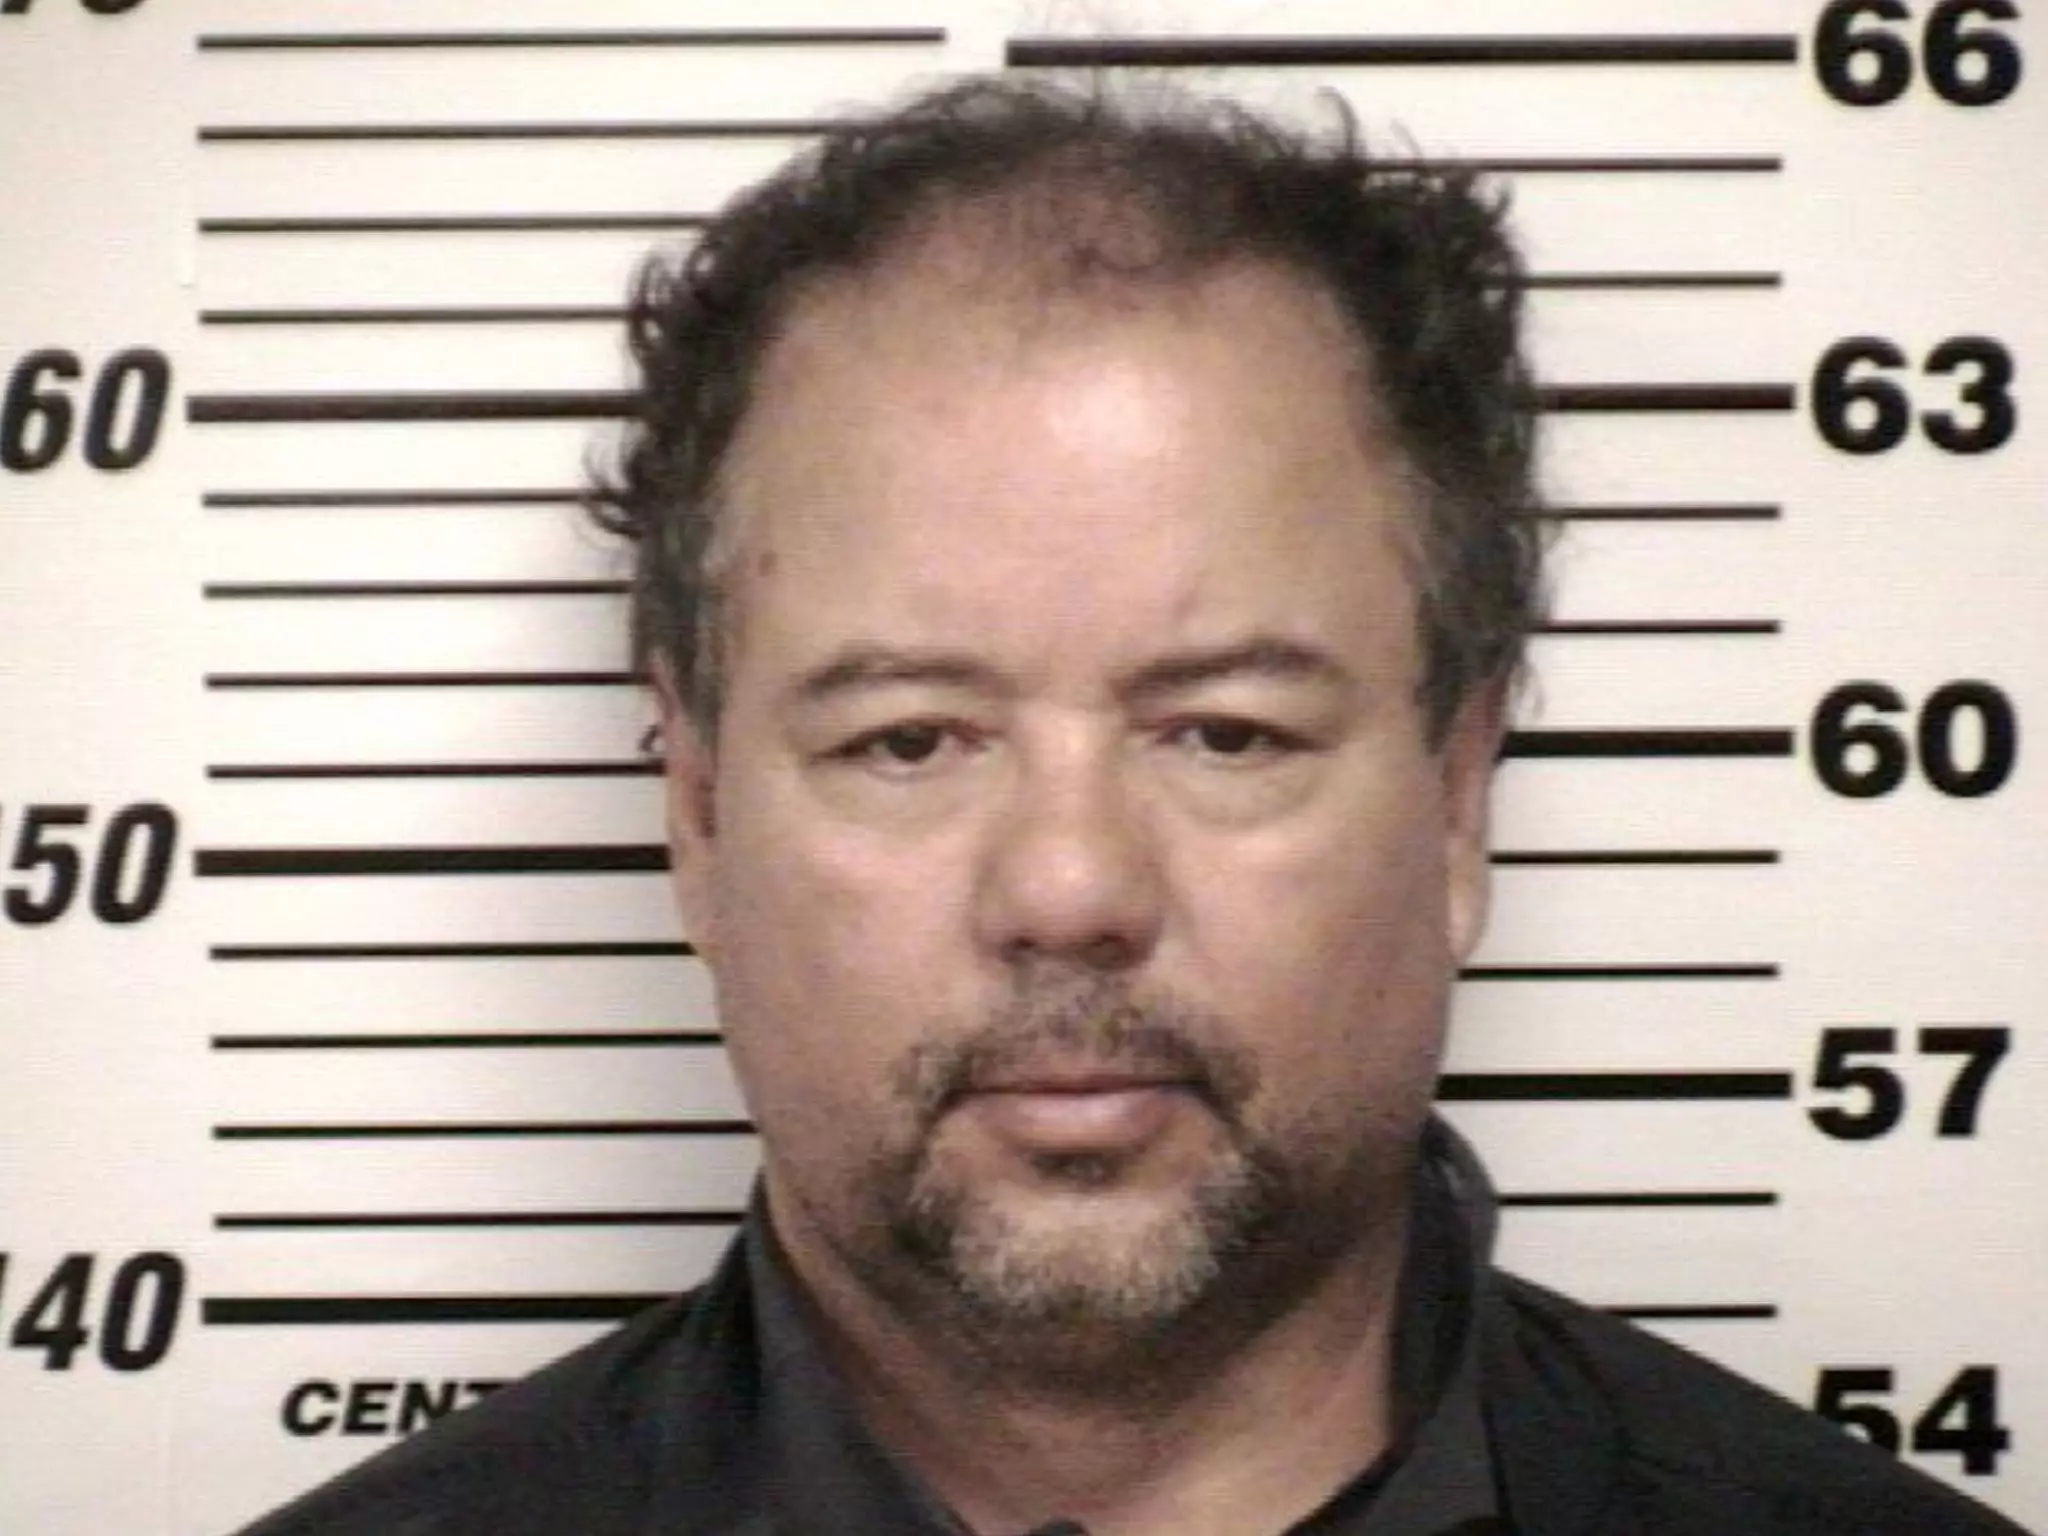 The Ariel Castro kidnappings took place between 2002 and 2004.